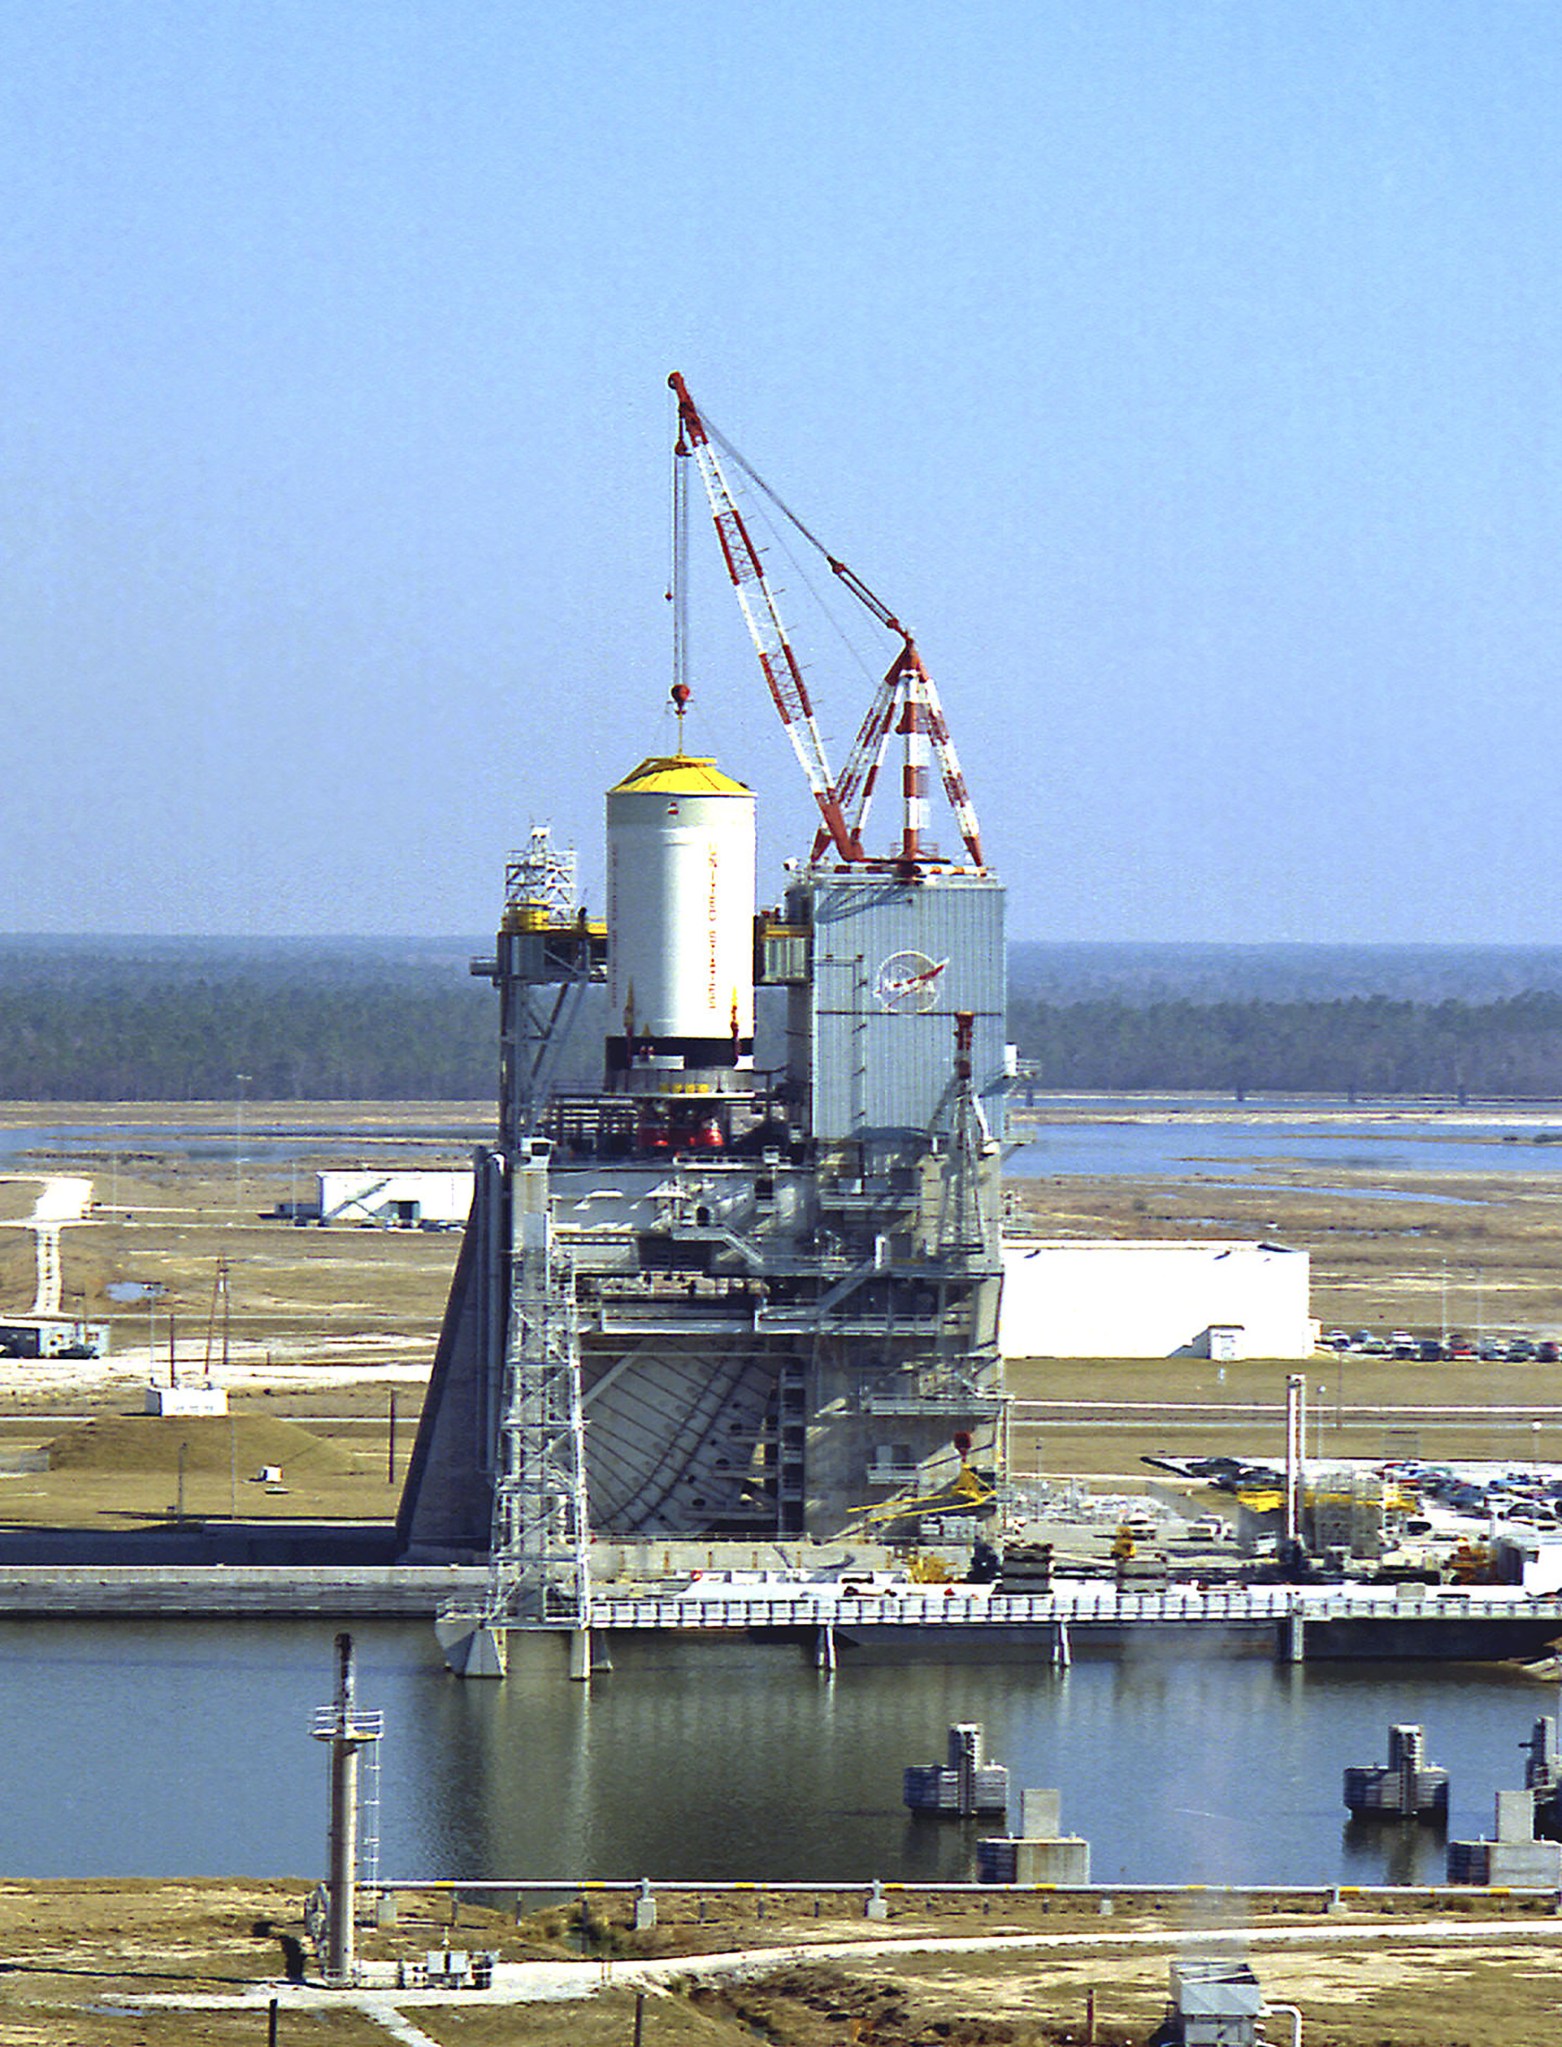 Teams at NASA’s Stennis Space Center install the Saturn V S-II-12 stage on the A-2 Test Stand on Dec. 22, 1969